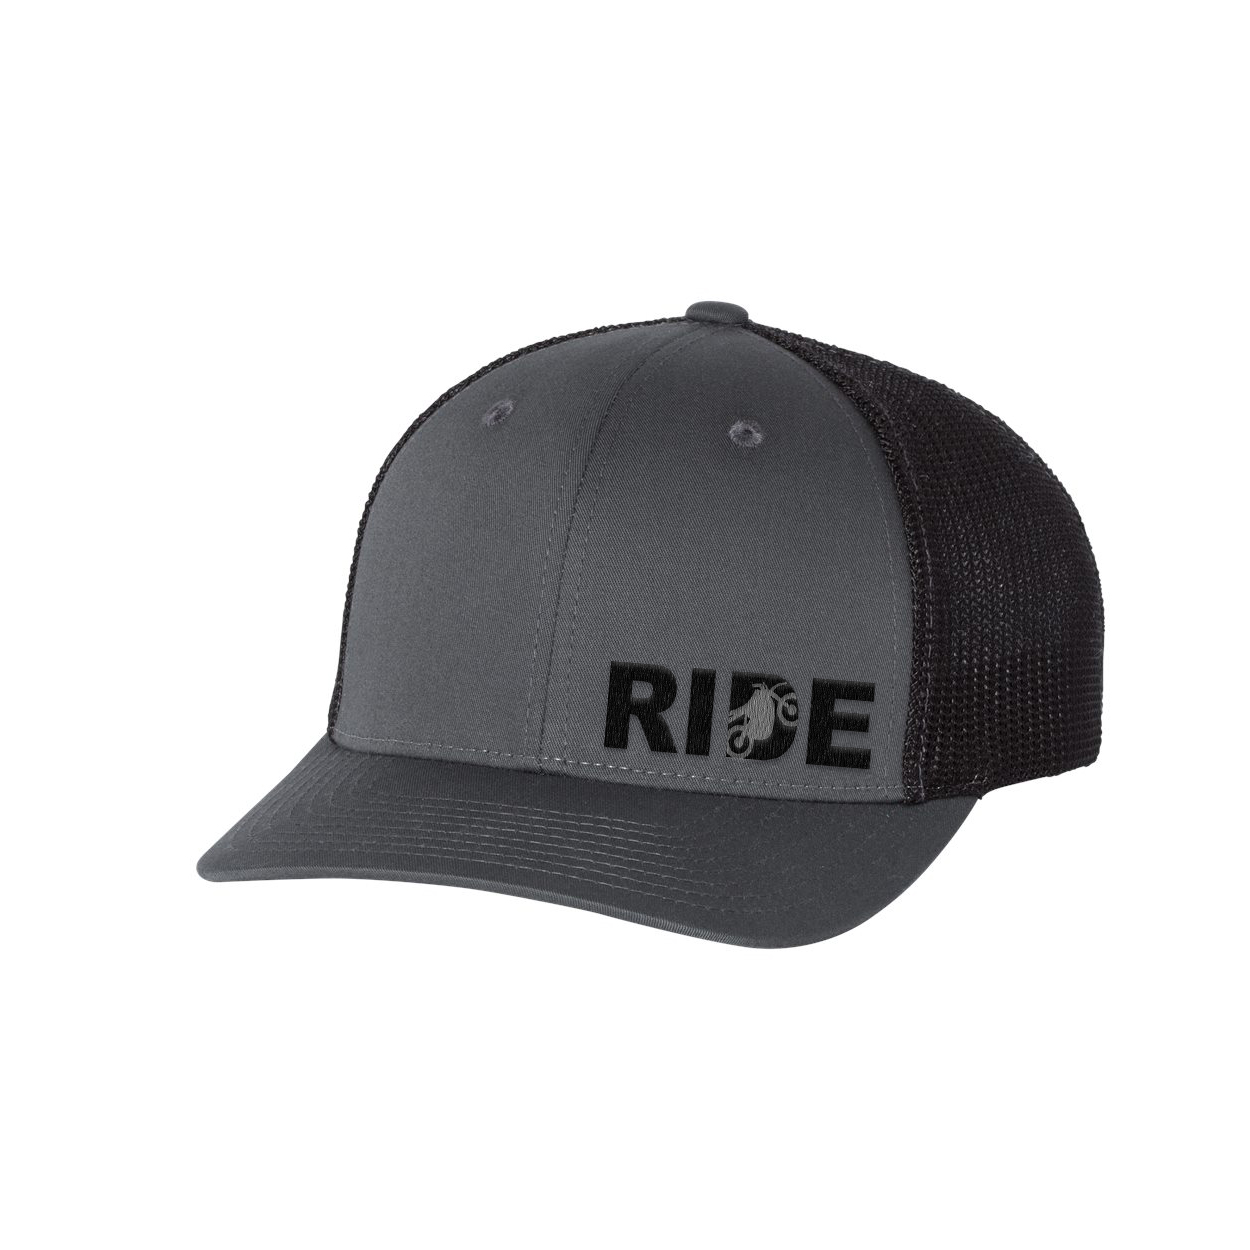 Ride Moto Logo Night Out Embroidered Snapback Trucker Hat Gray/Black